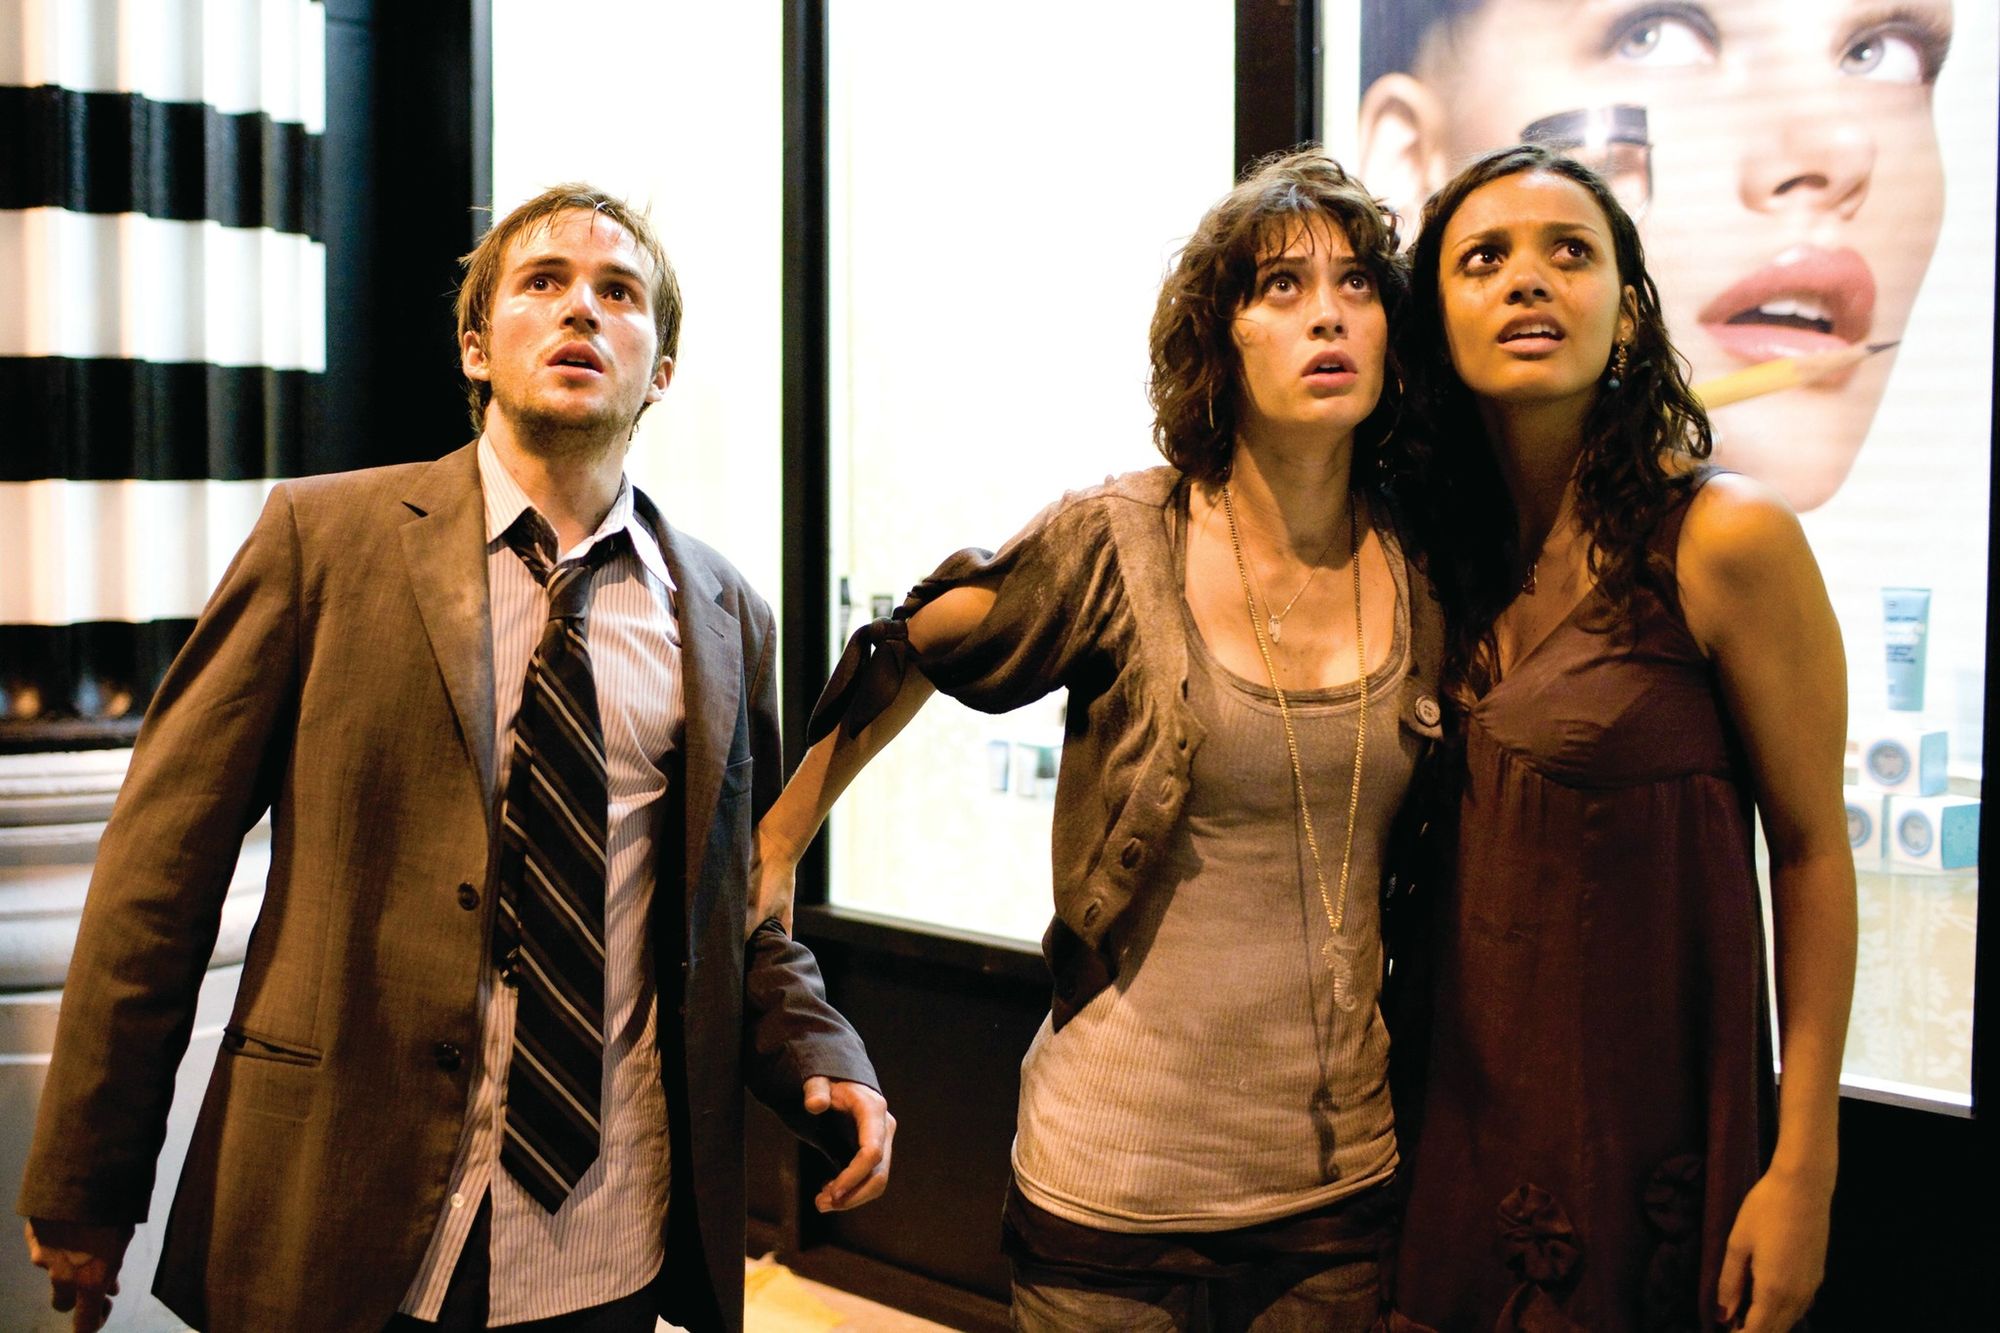 Michael Stahl-David, Lizzy Caplan and Jessica Lucas survey the skyline in a still from CLOVERFIELD.